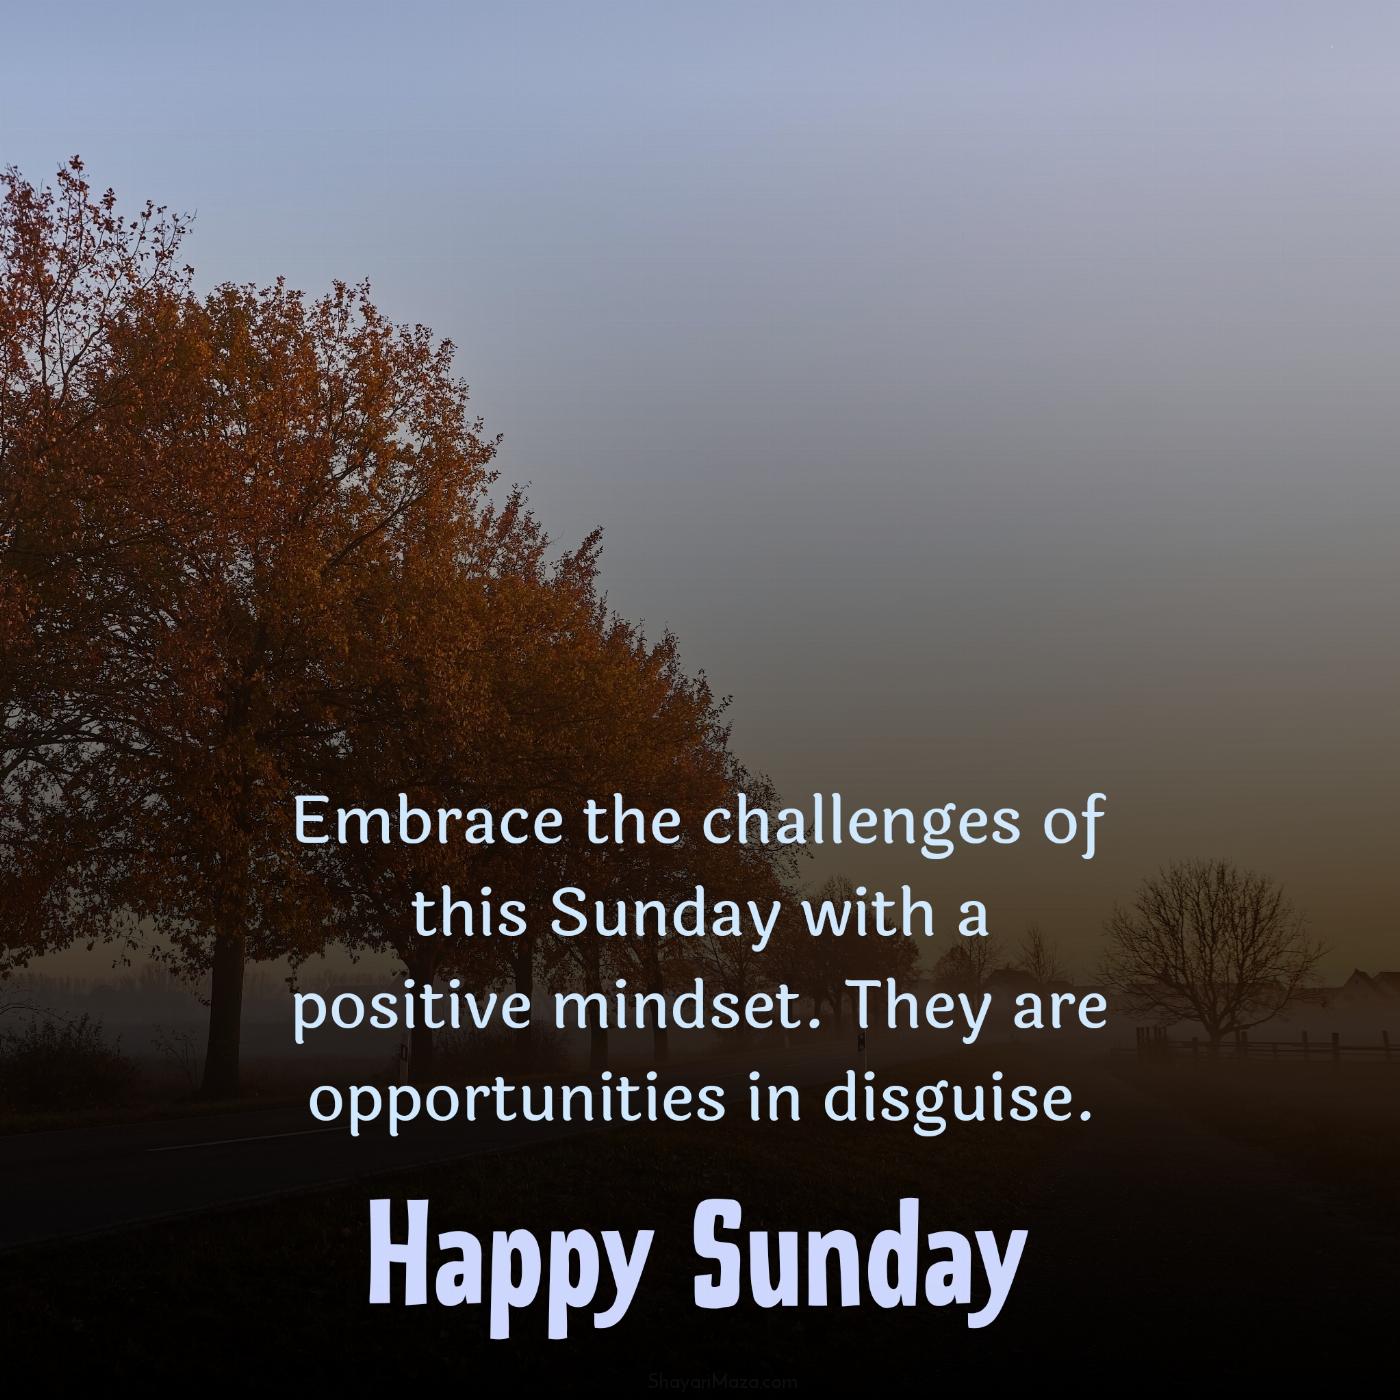 Embrace the challenges of this Sunday with a positive mindset